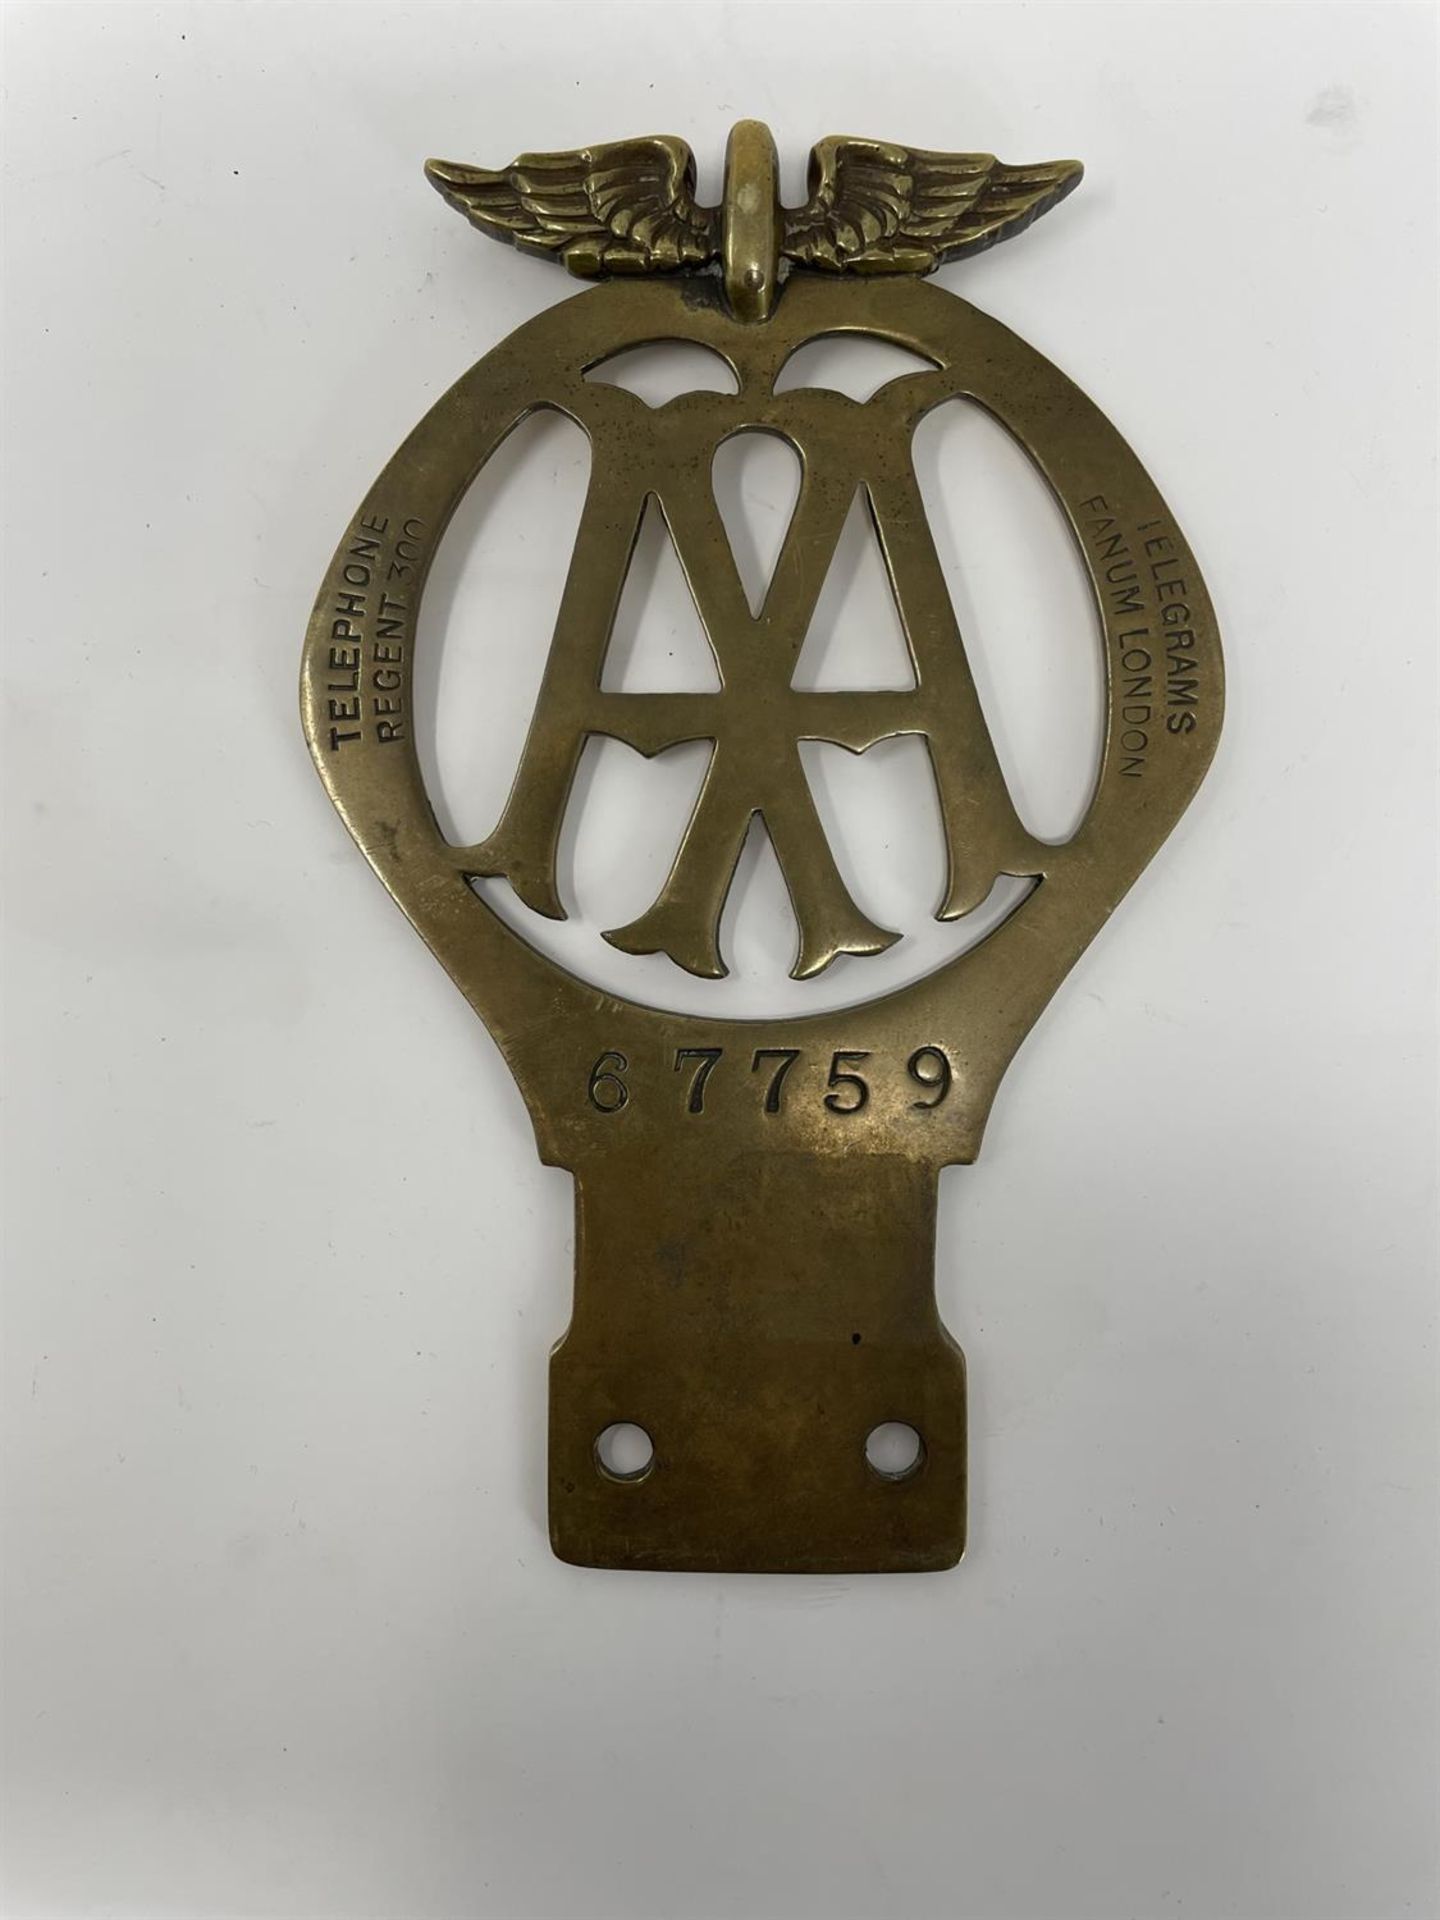 A Fine Pair of Automobile Association Brass Badges - Image 2 of 4